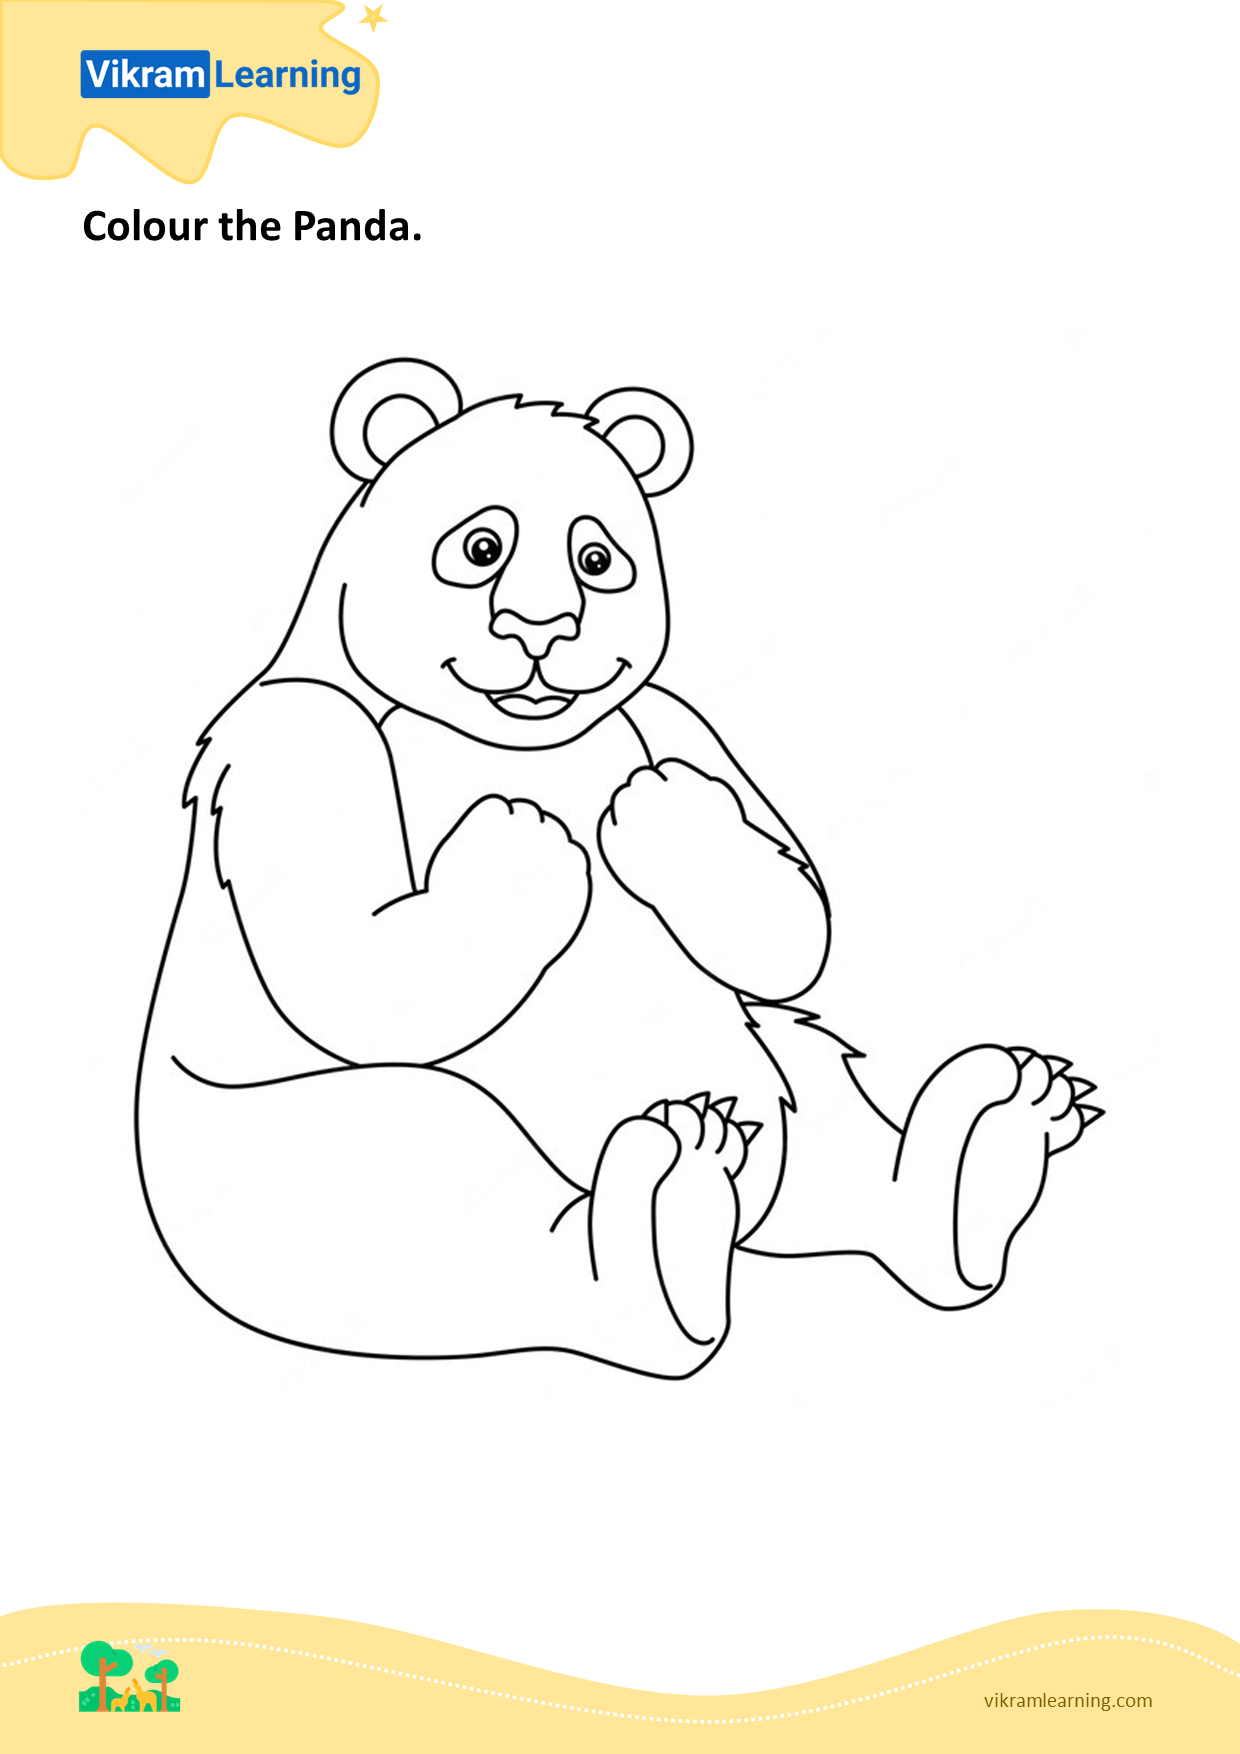 Download colour the panda worksheets